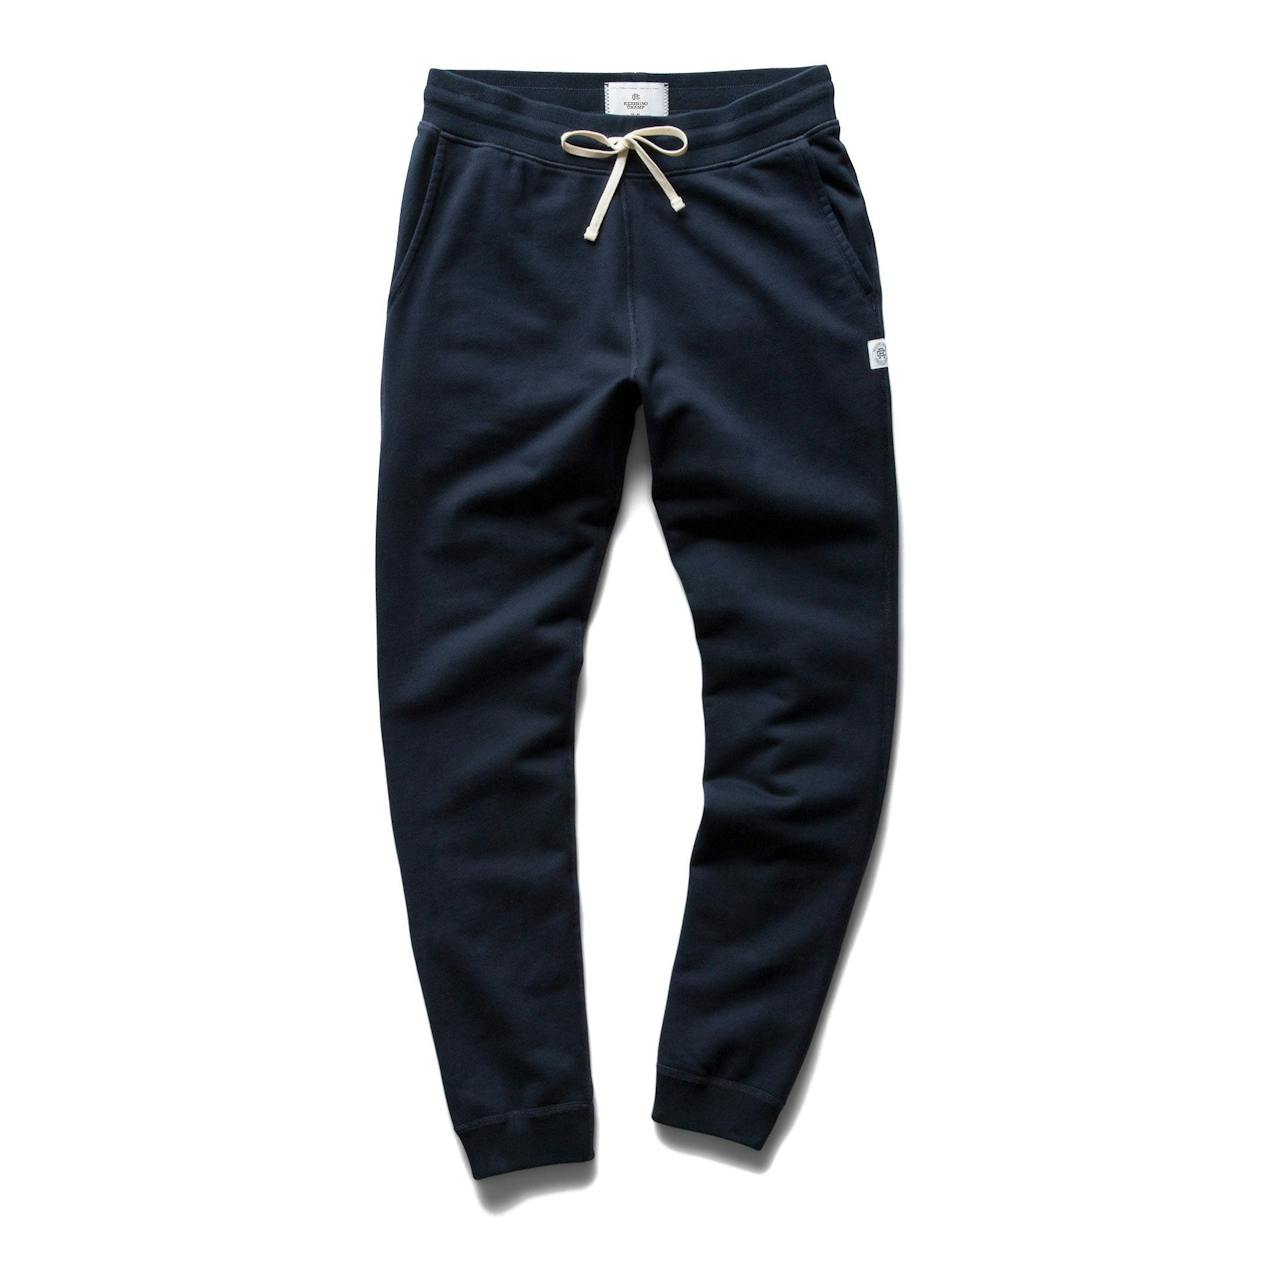 Reigning Champ Slim Sweatpant - Midweight Terry